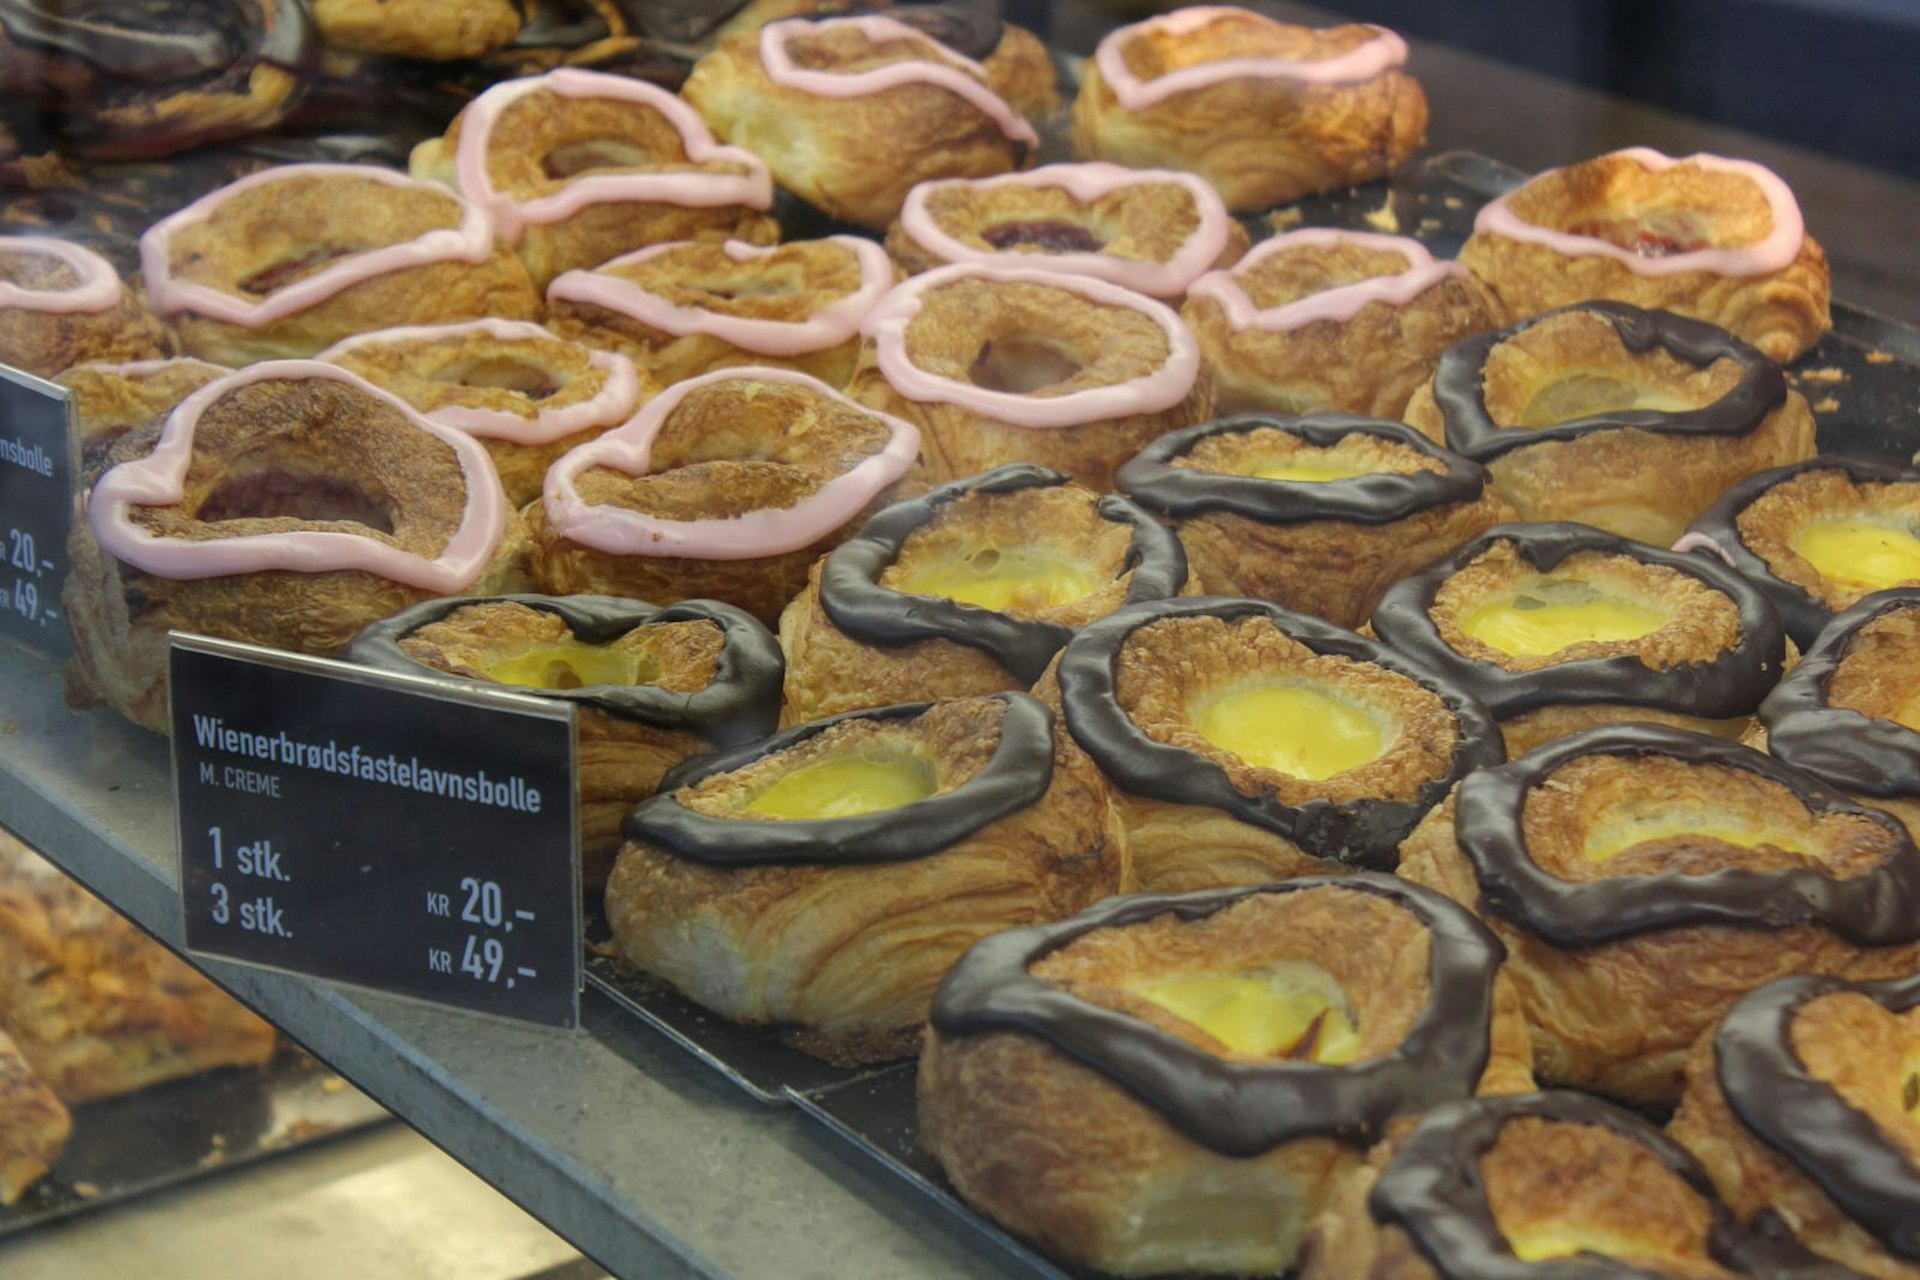 Danish pastries lined up in the window display at bakery Lagkagehuset © Caroline Hadamitzky / Lonely Planet